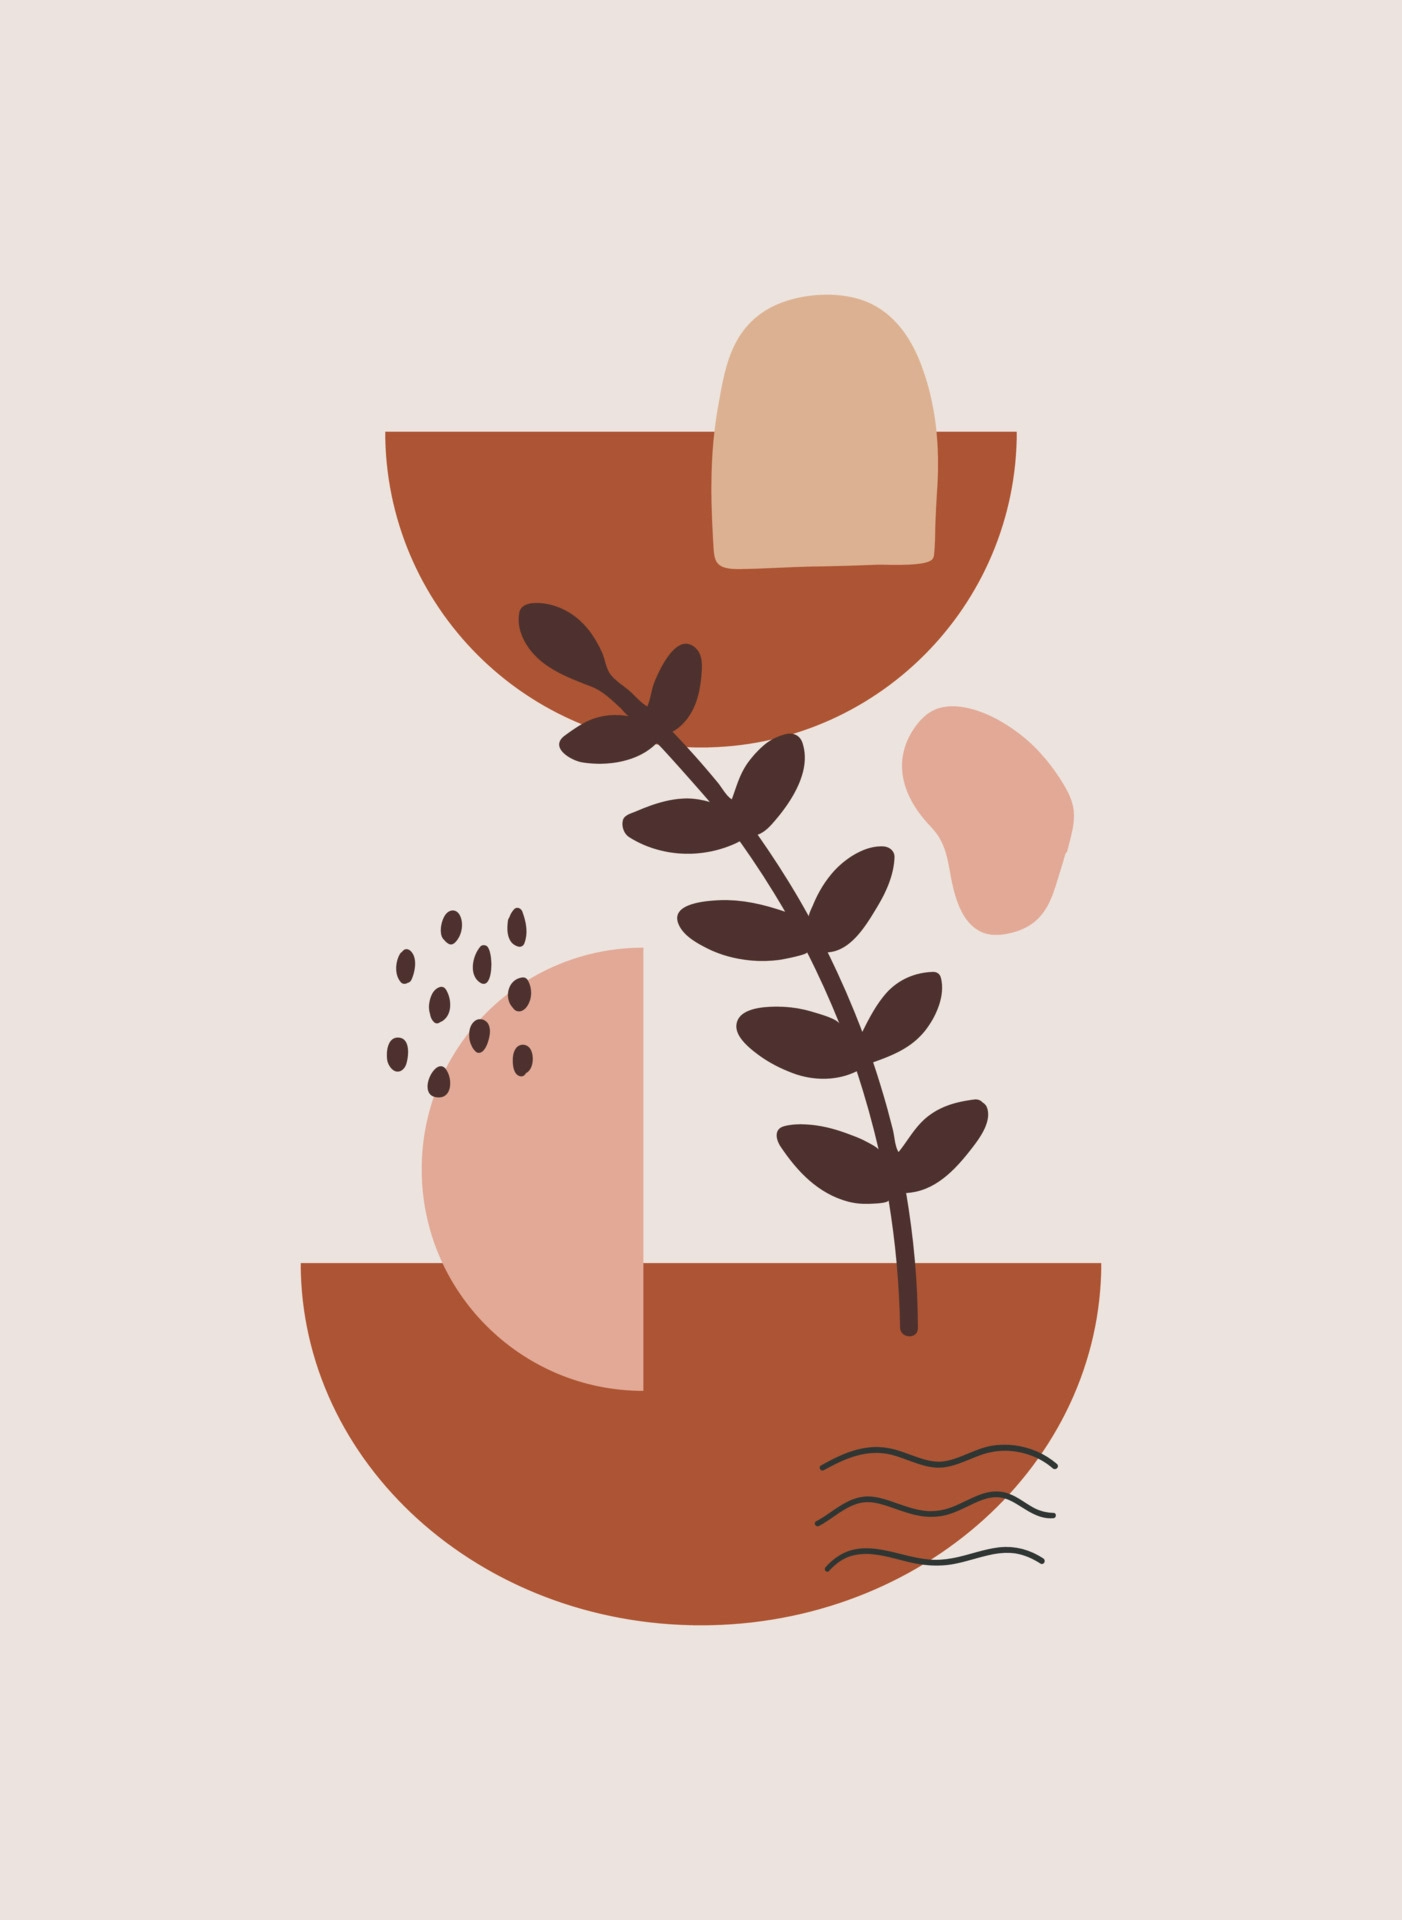 A graphic design with plants and other objects - Balance